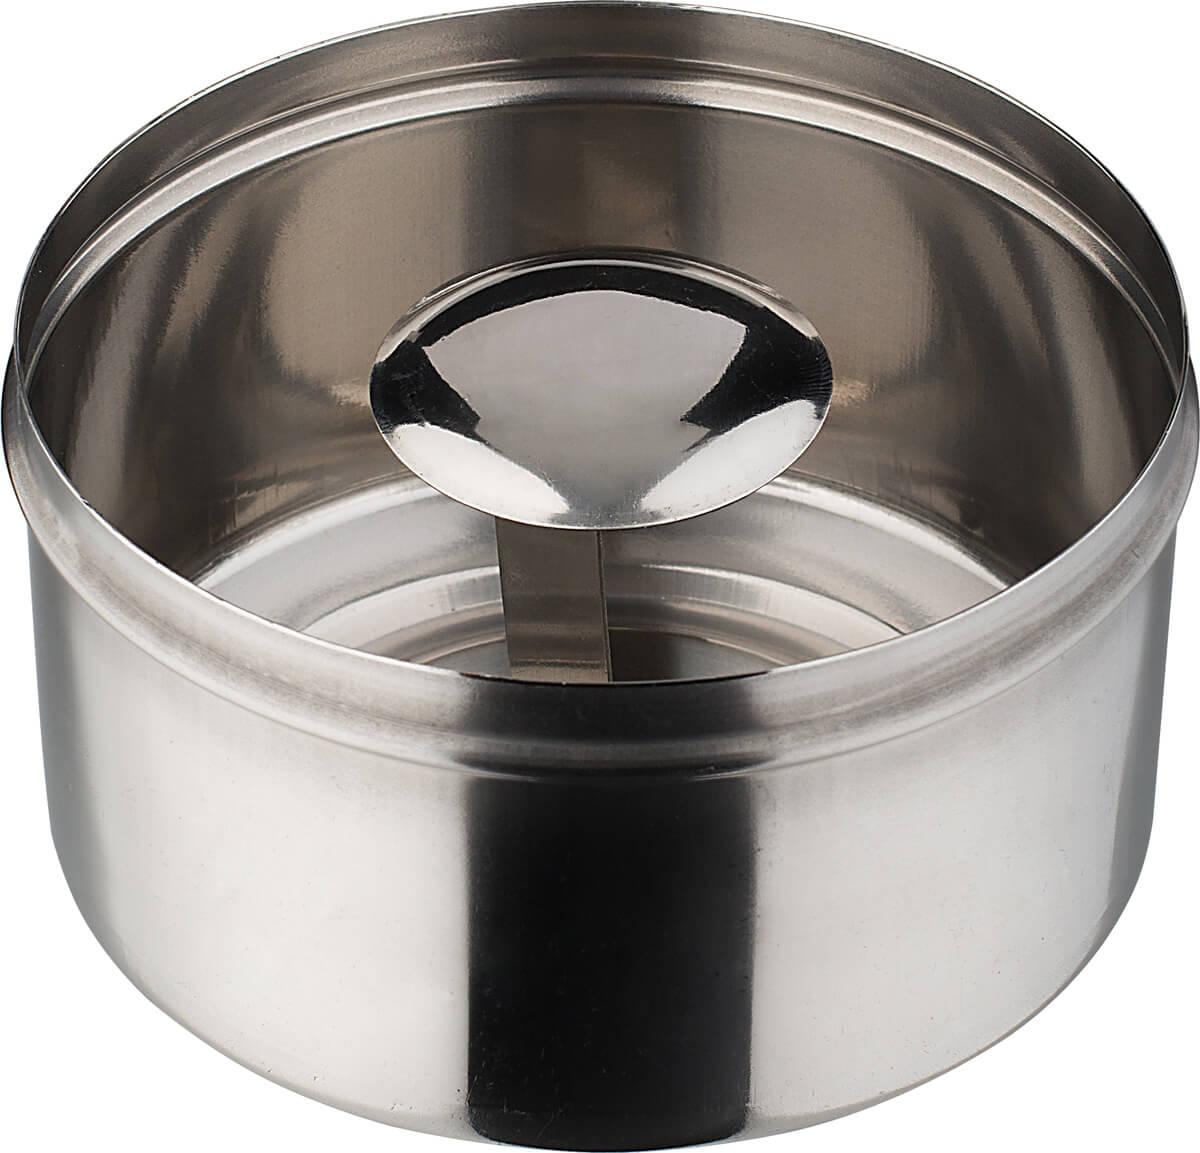 Wind ashtray - stainless steel (10cm)